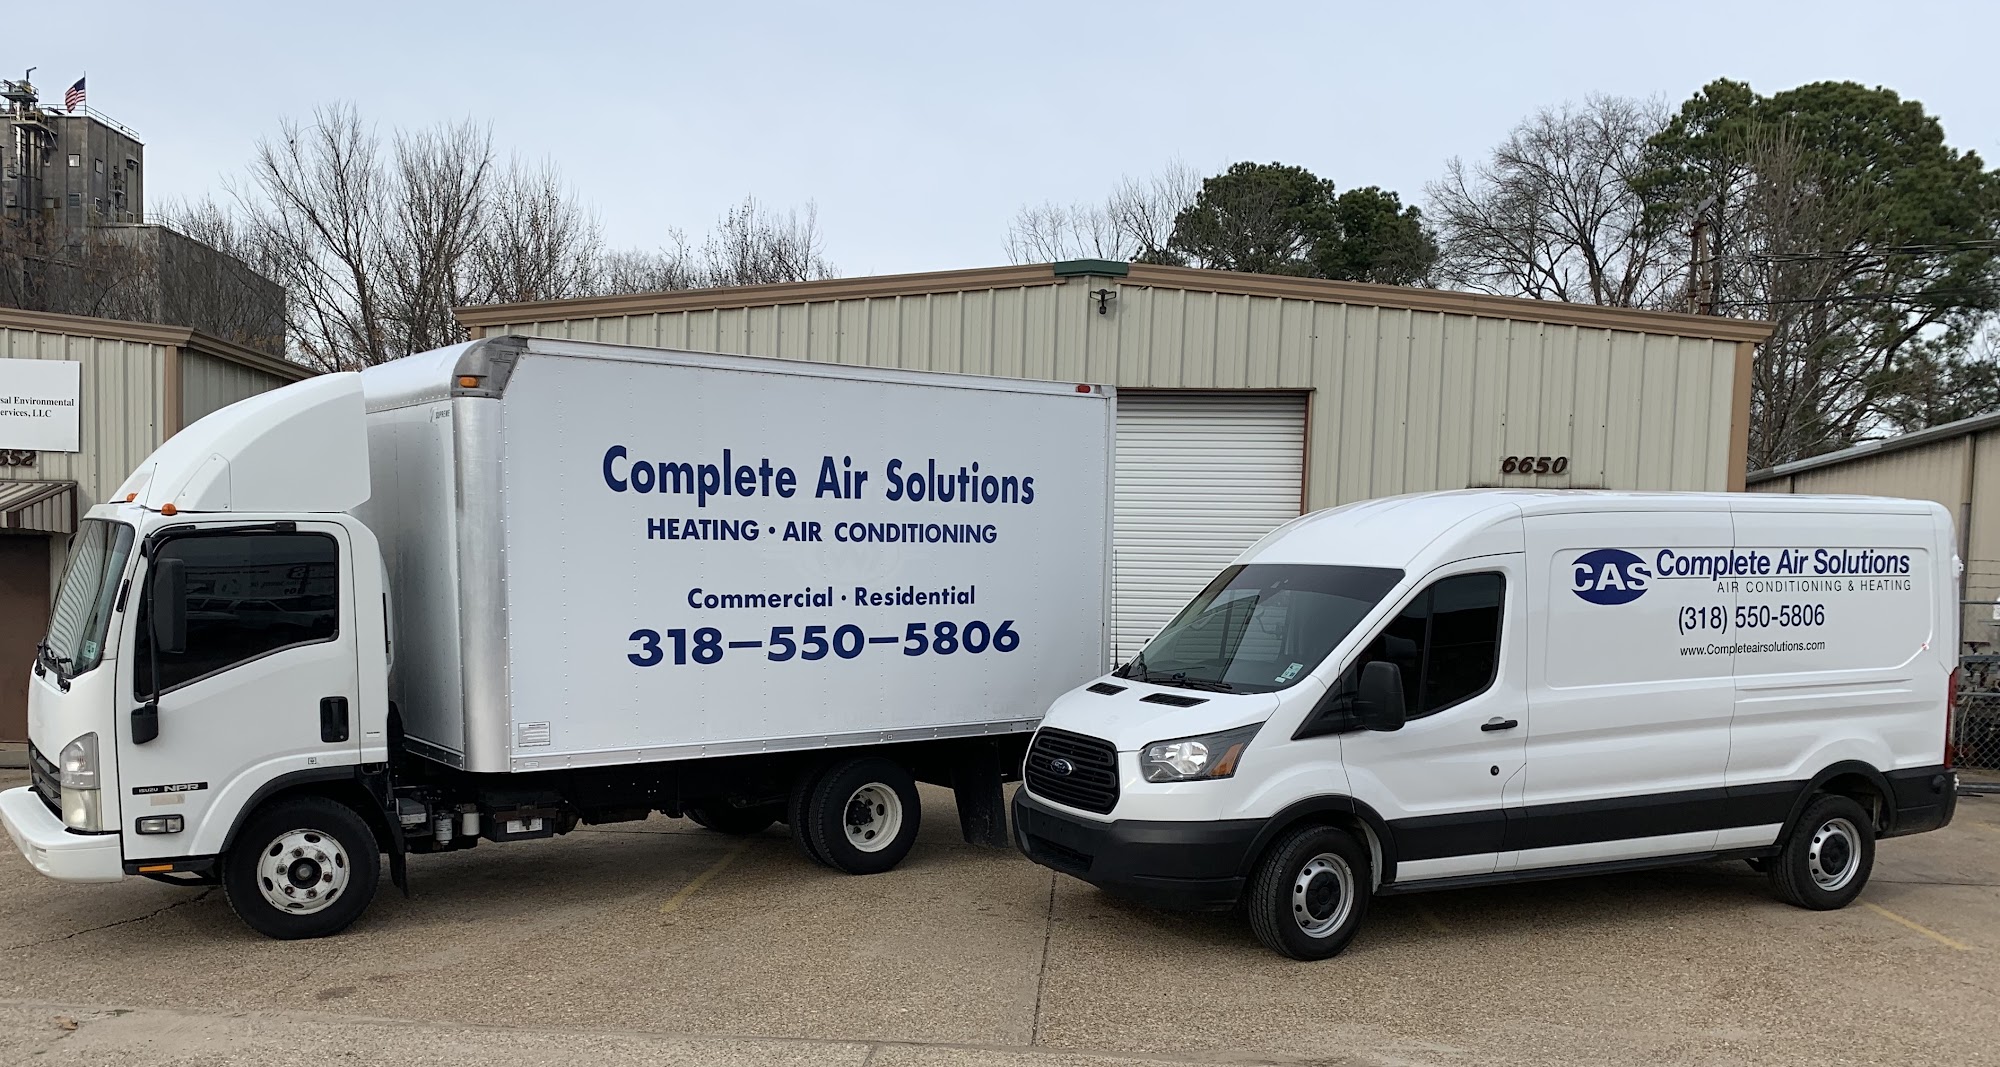 Complete Air Solutions